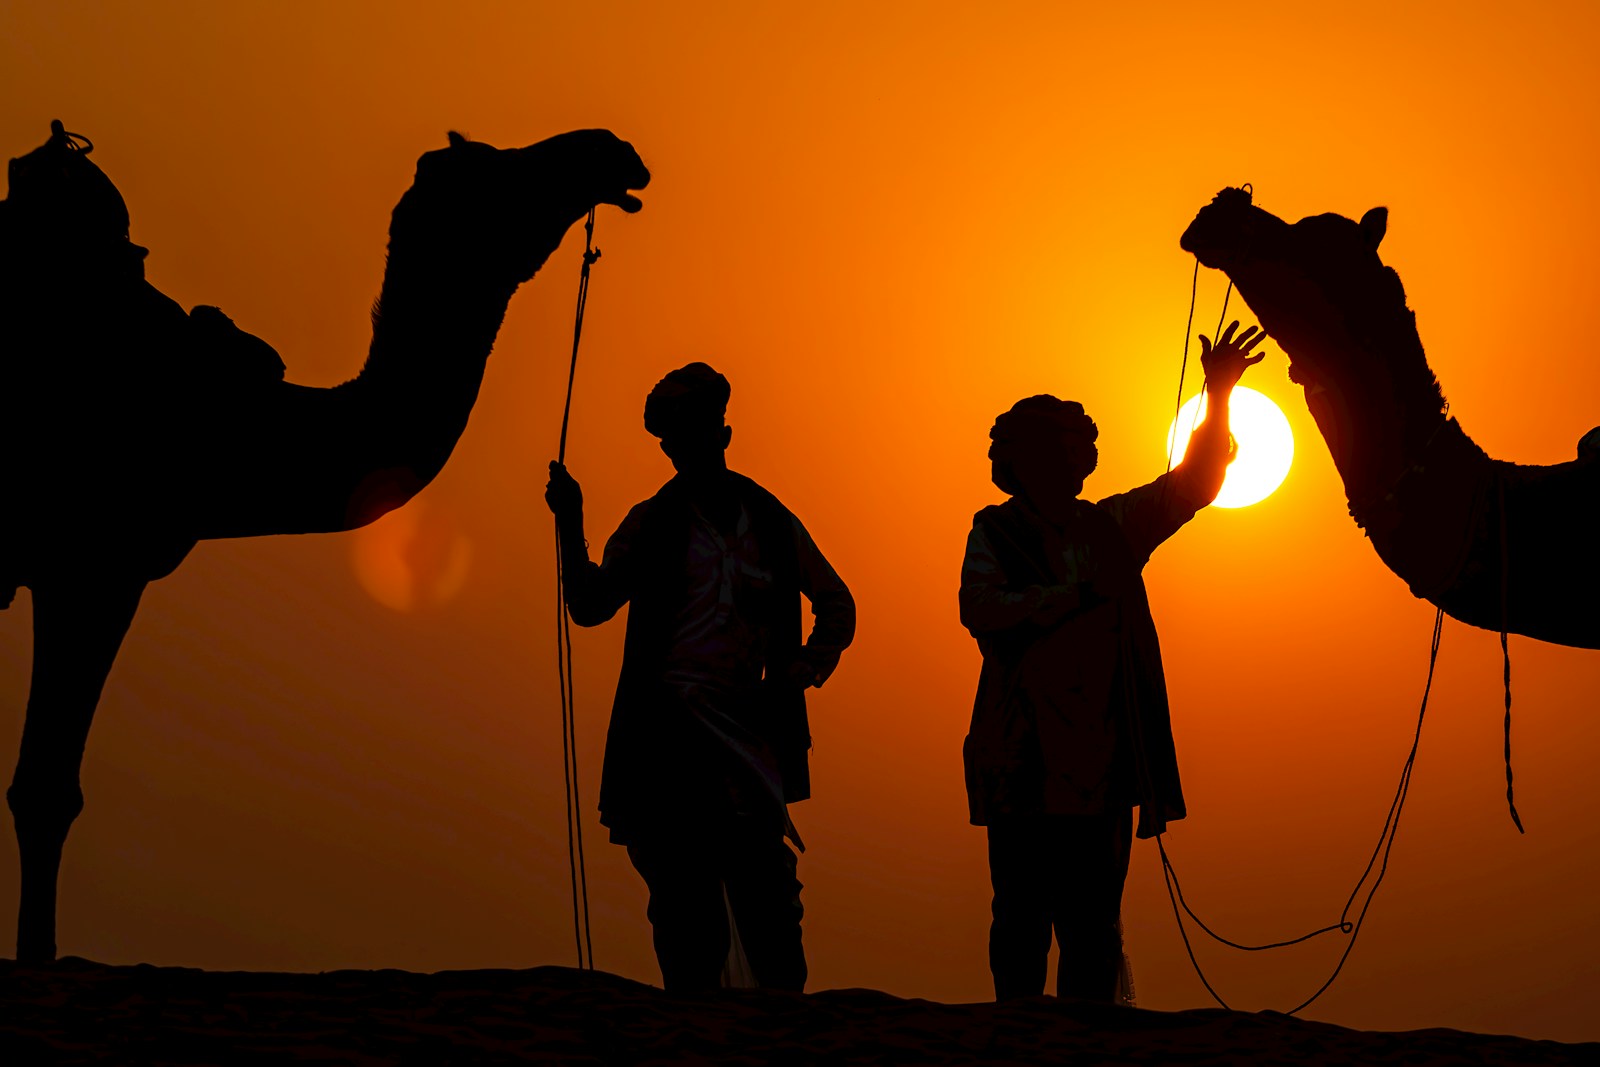 a group of people standing next to two camels